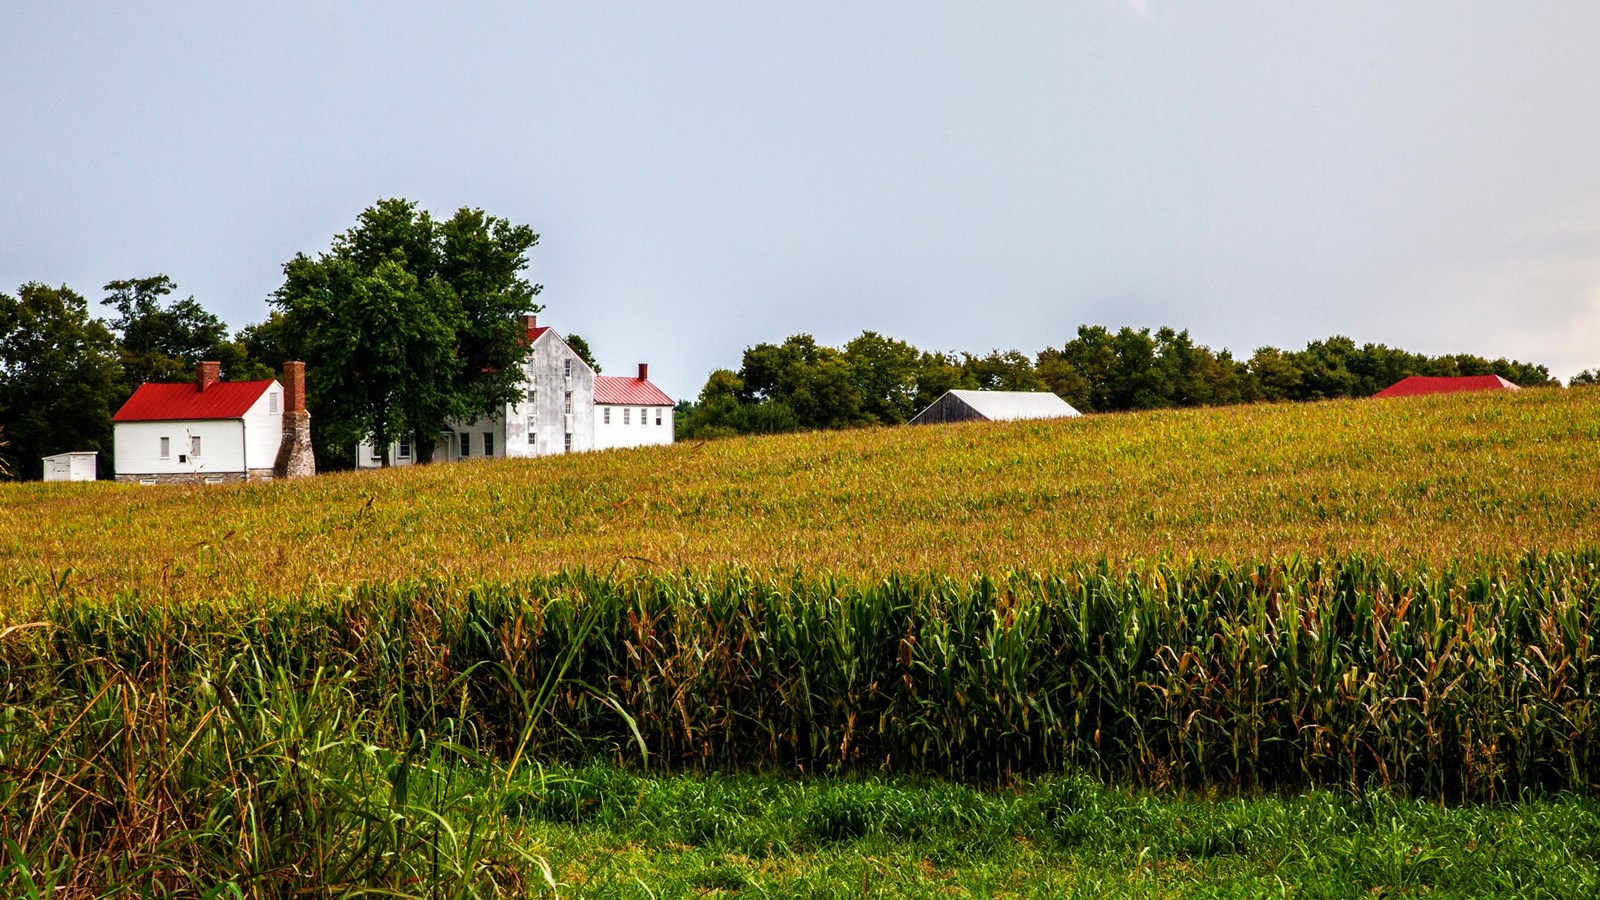 Two farm houses sit on the far end of an open field of corn.